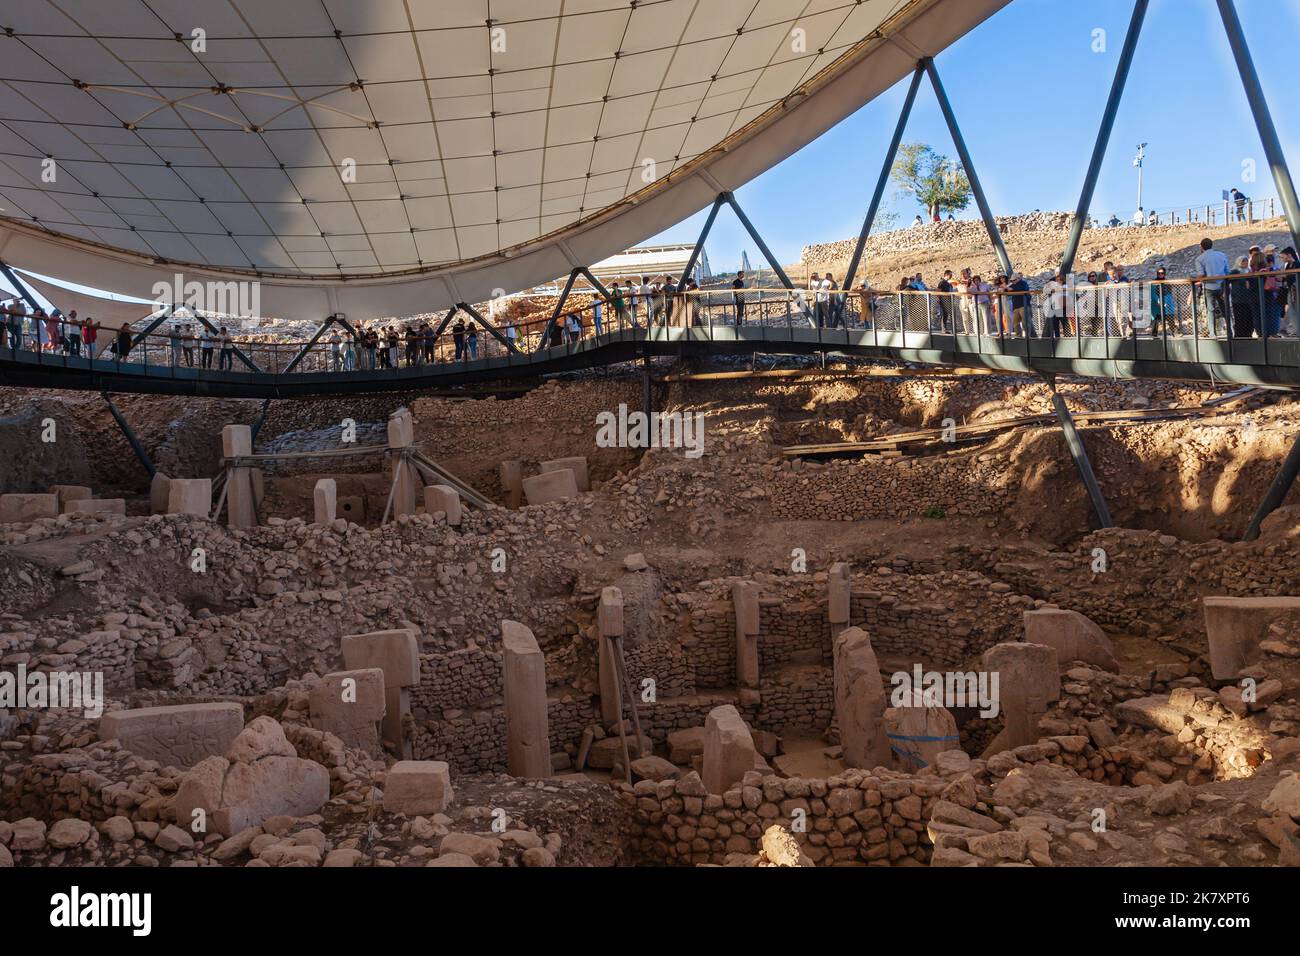 People visit the Göbeklitepe ruins. Göbeklitepe is the first and biggest temple in history. Stock Photo